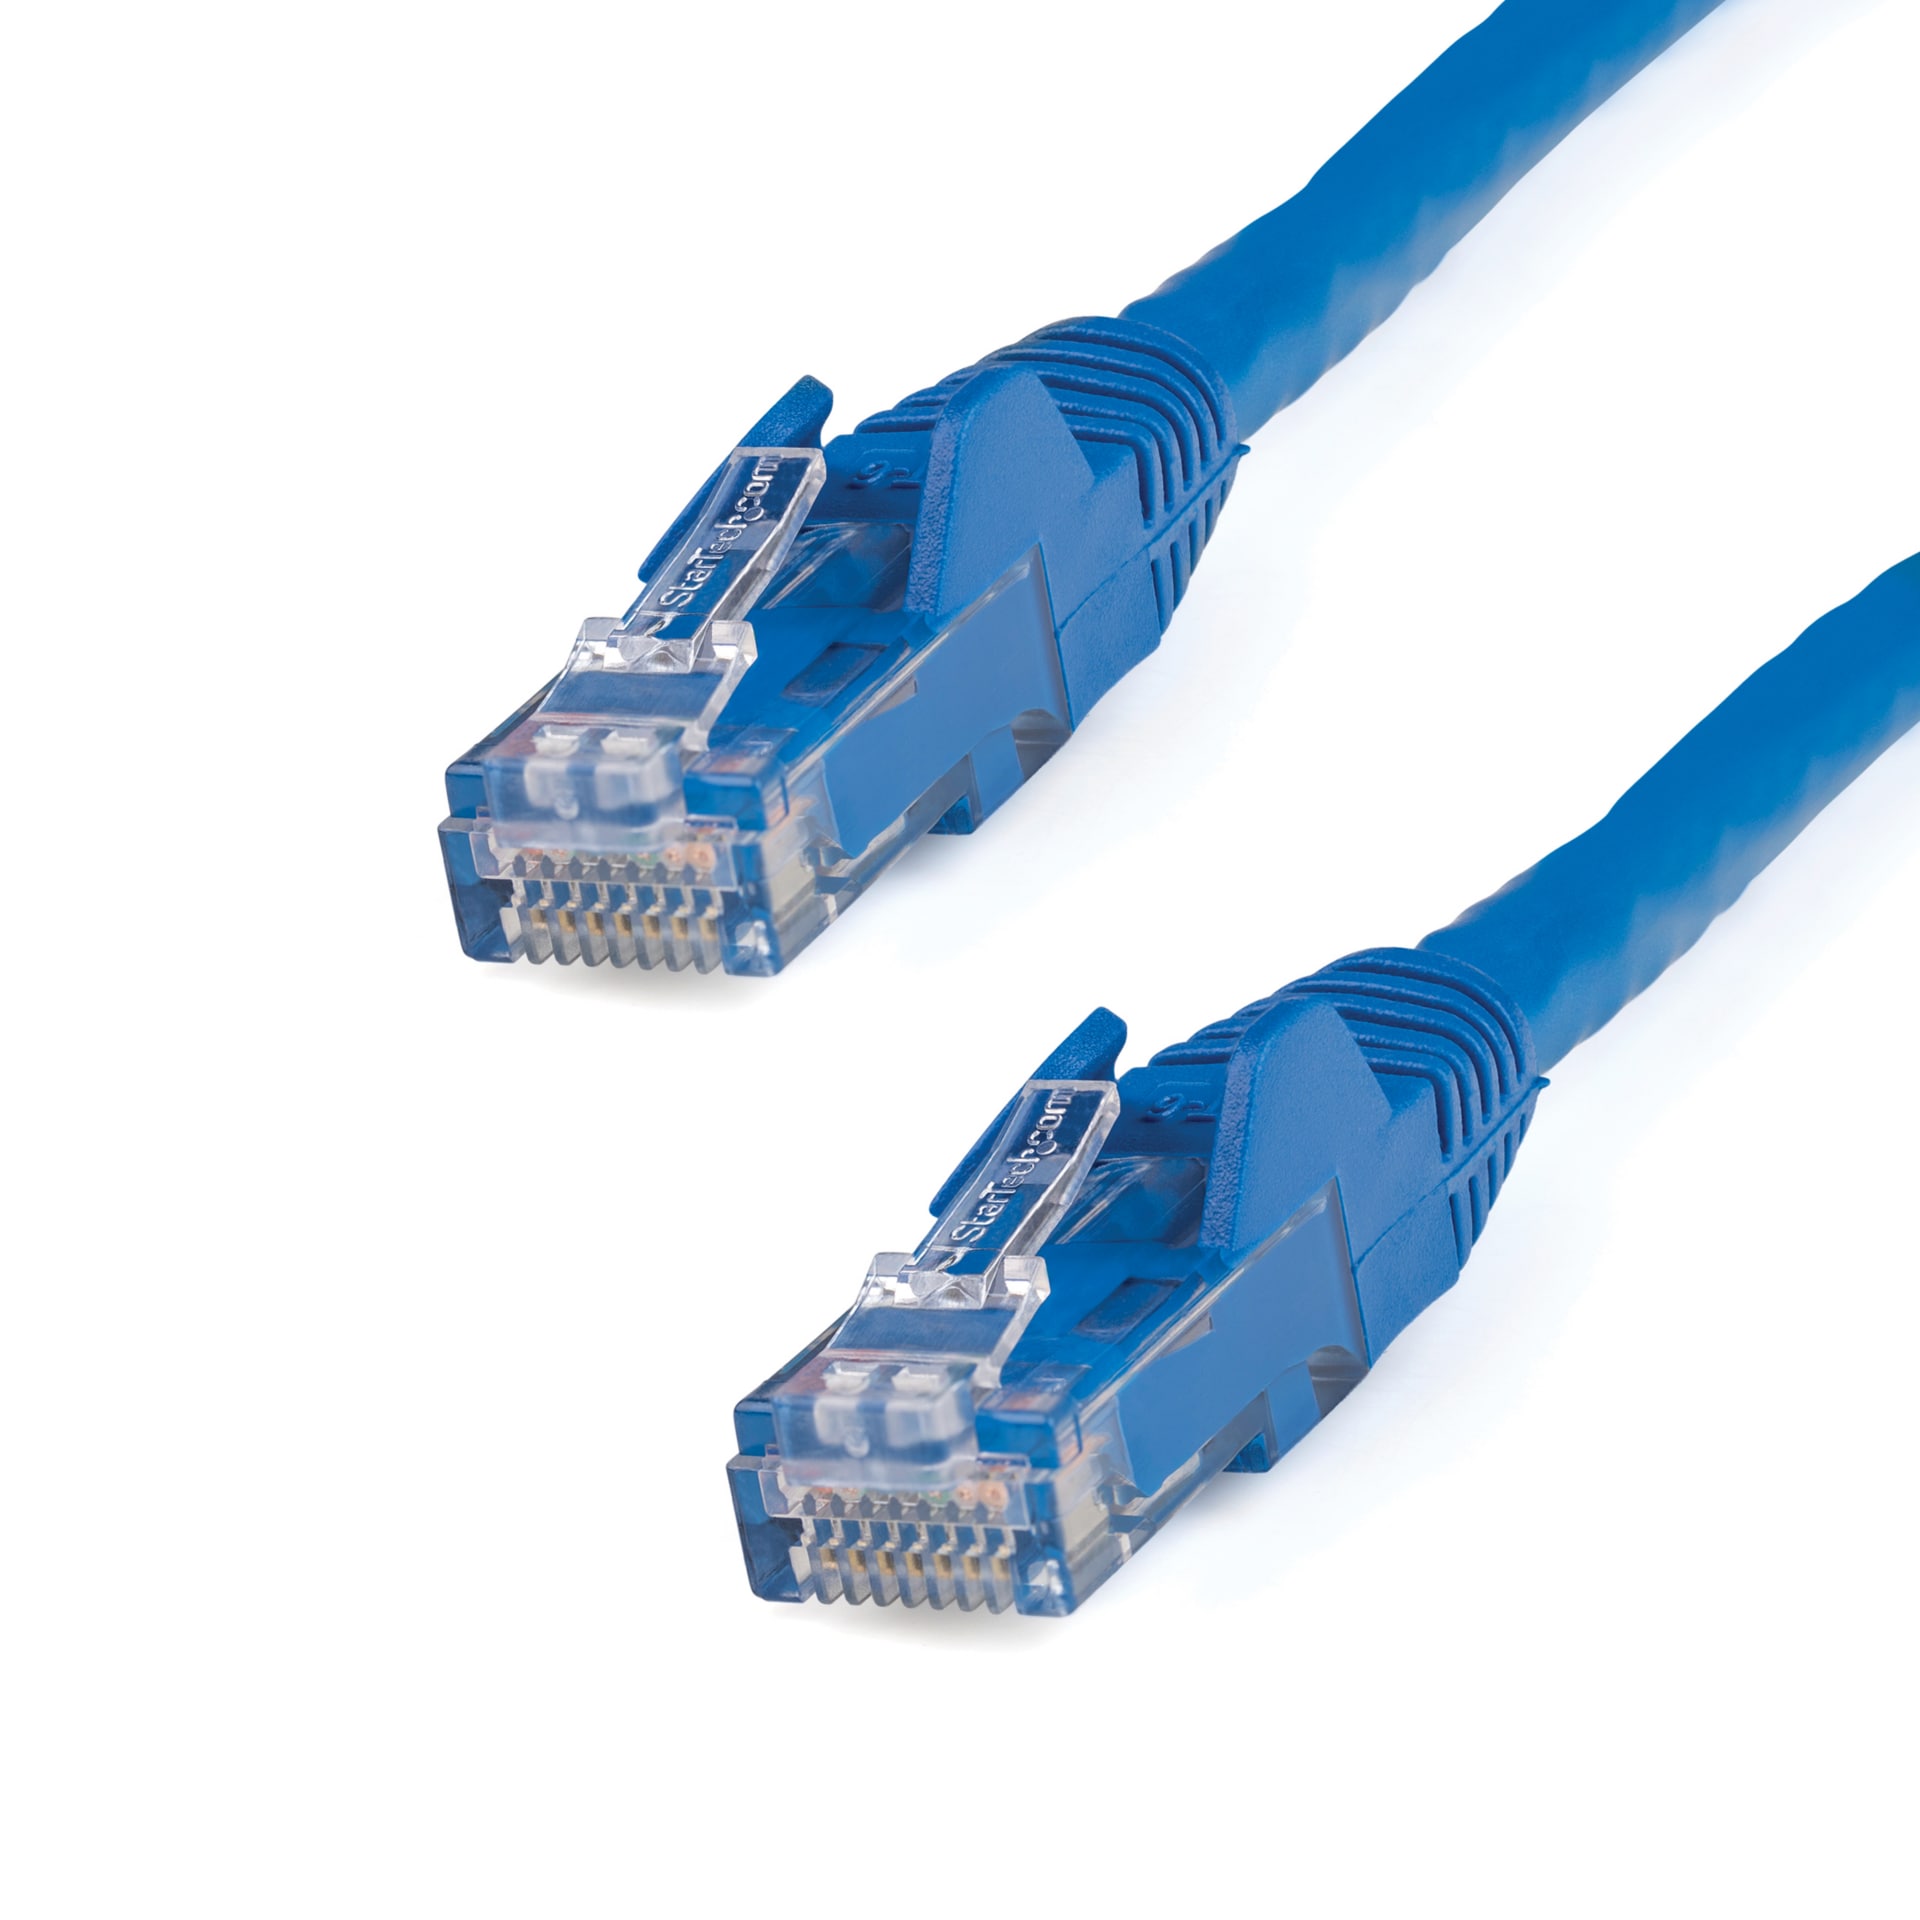 StarTech.com CAT6 Ethernet Cable 15' Blue 650MHz CAT 6 Snagless Patch Cord